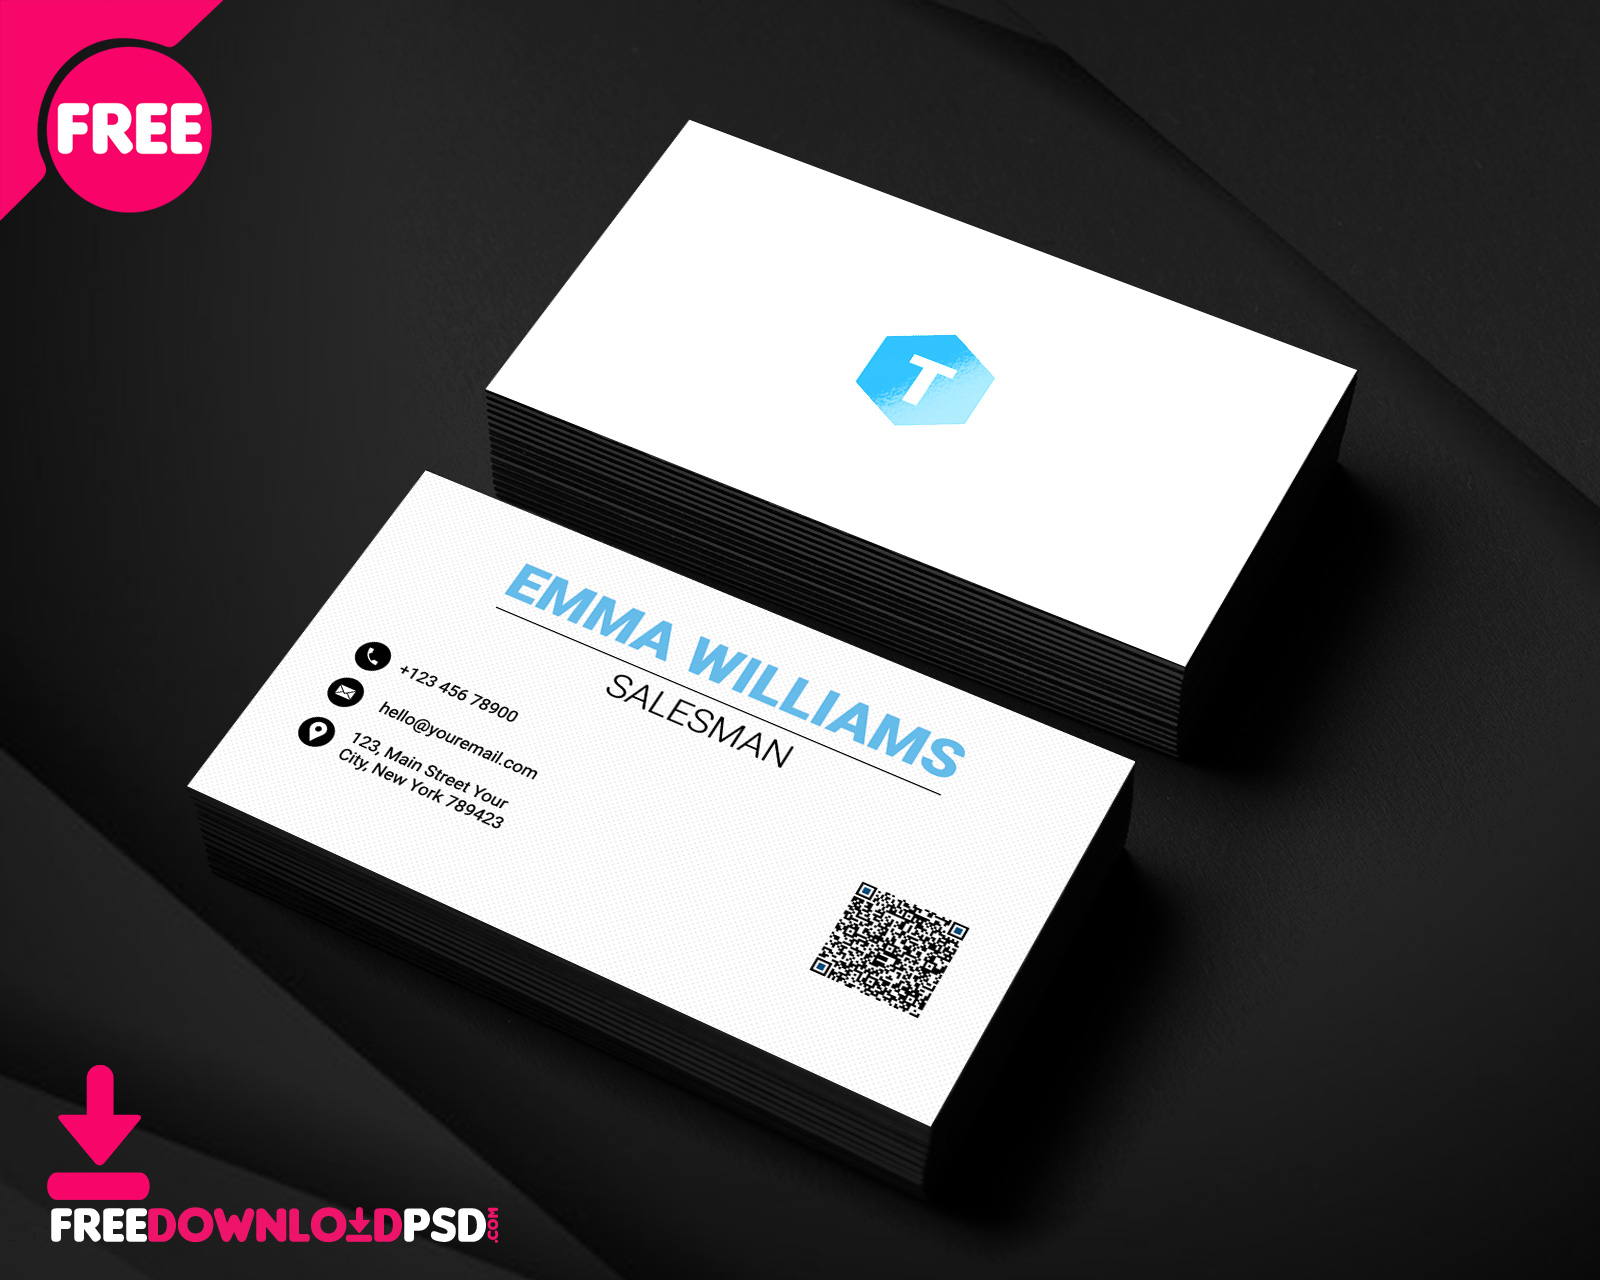 Salesman Business Card PSD Template  FreedownloadPSD.com Intended For Blank Business Card Template Psd